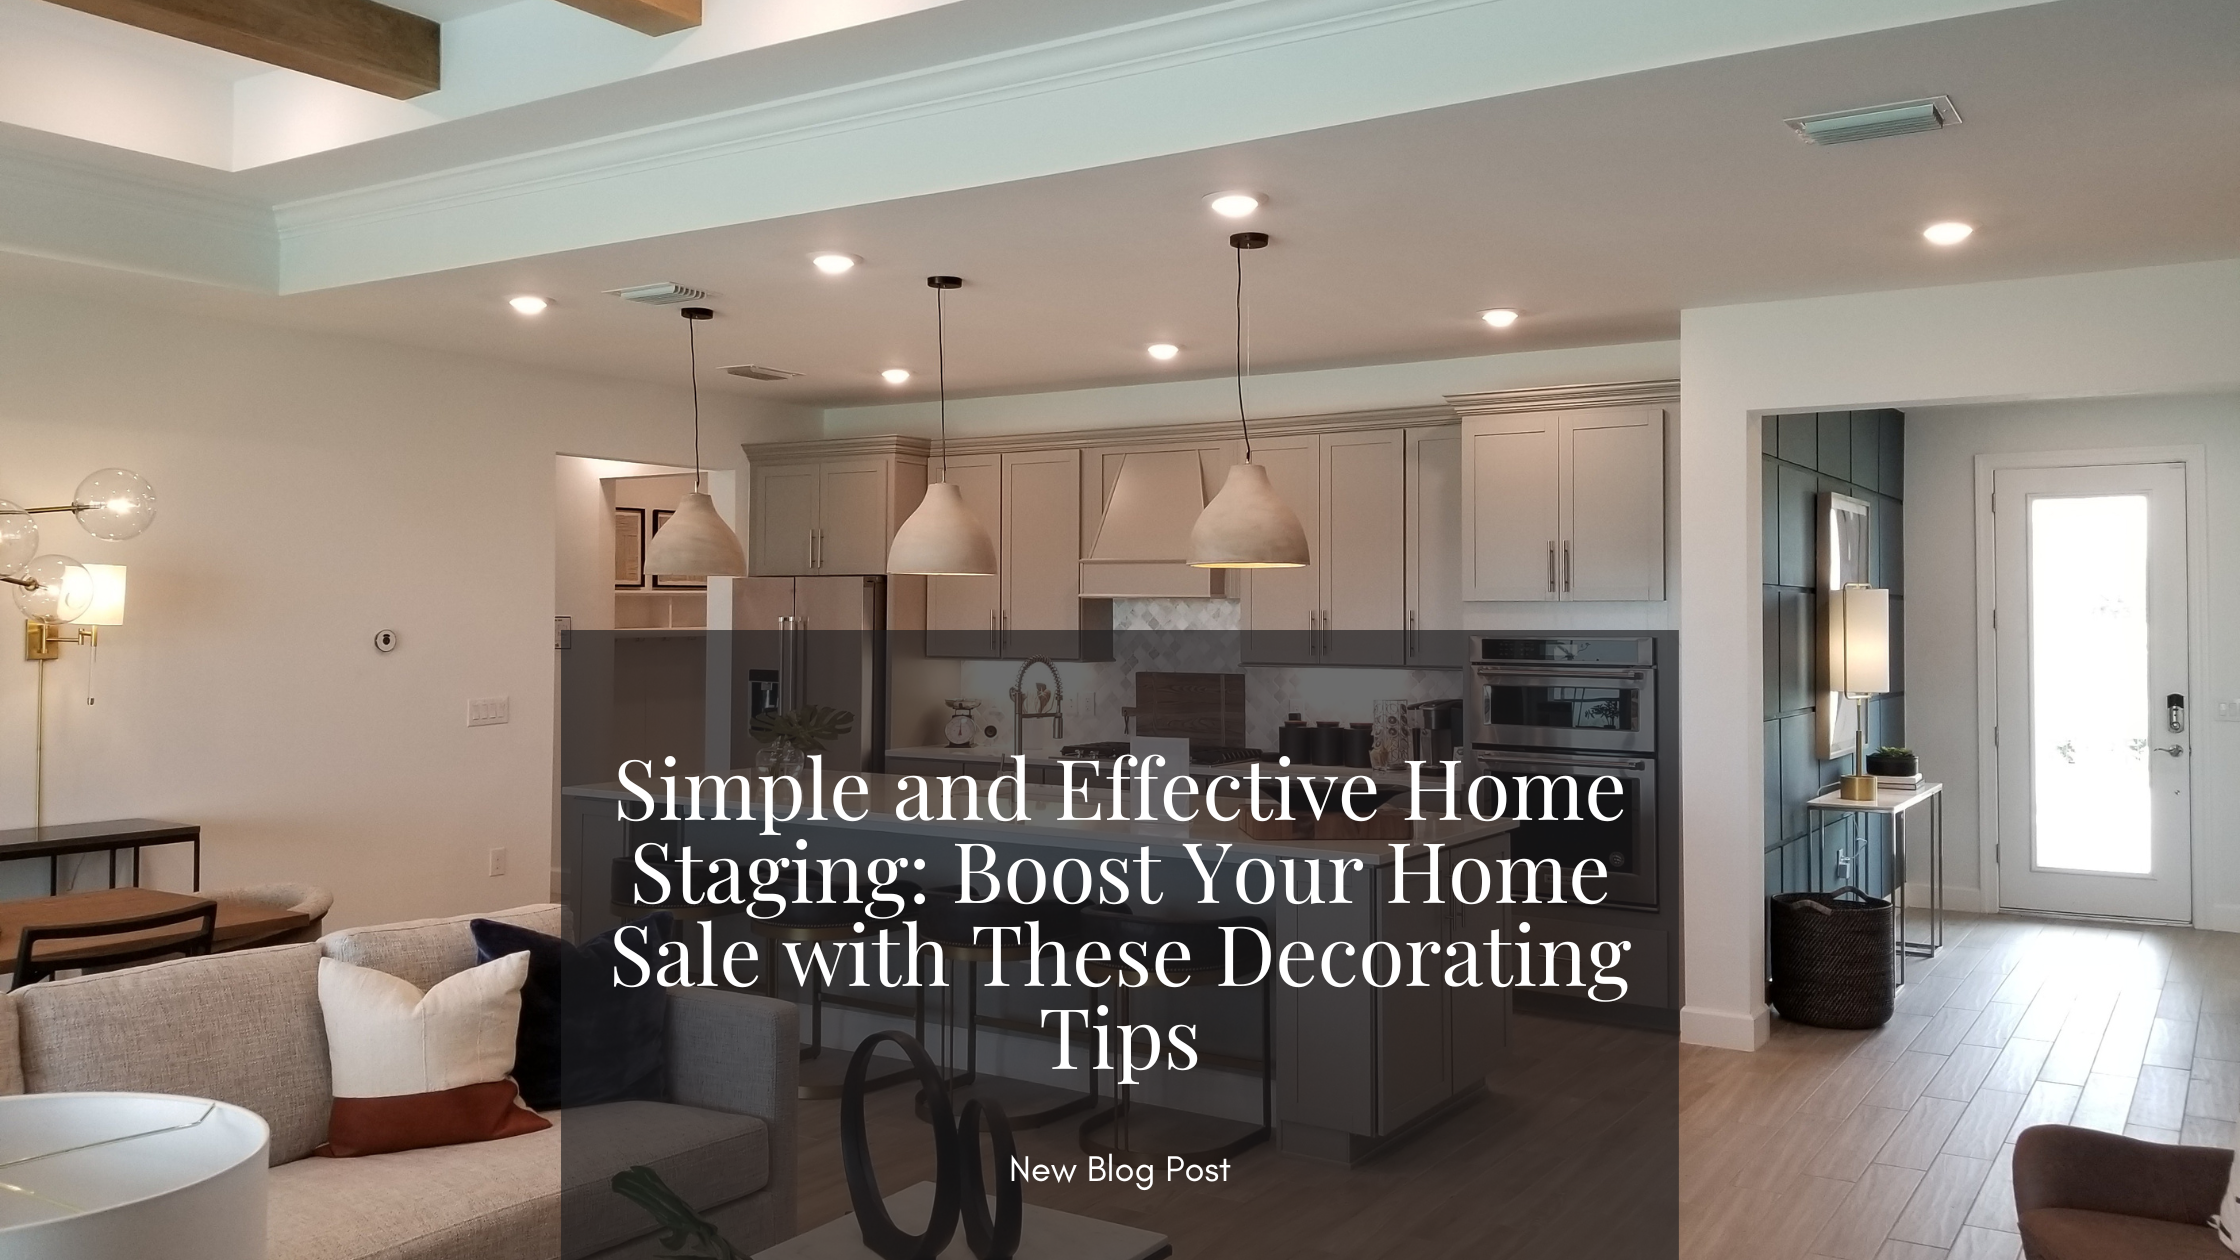 Simple and Effective Home Staging: Boost Your Home Sale with These Decorating Tips